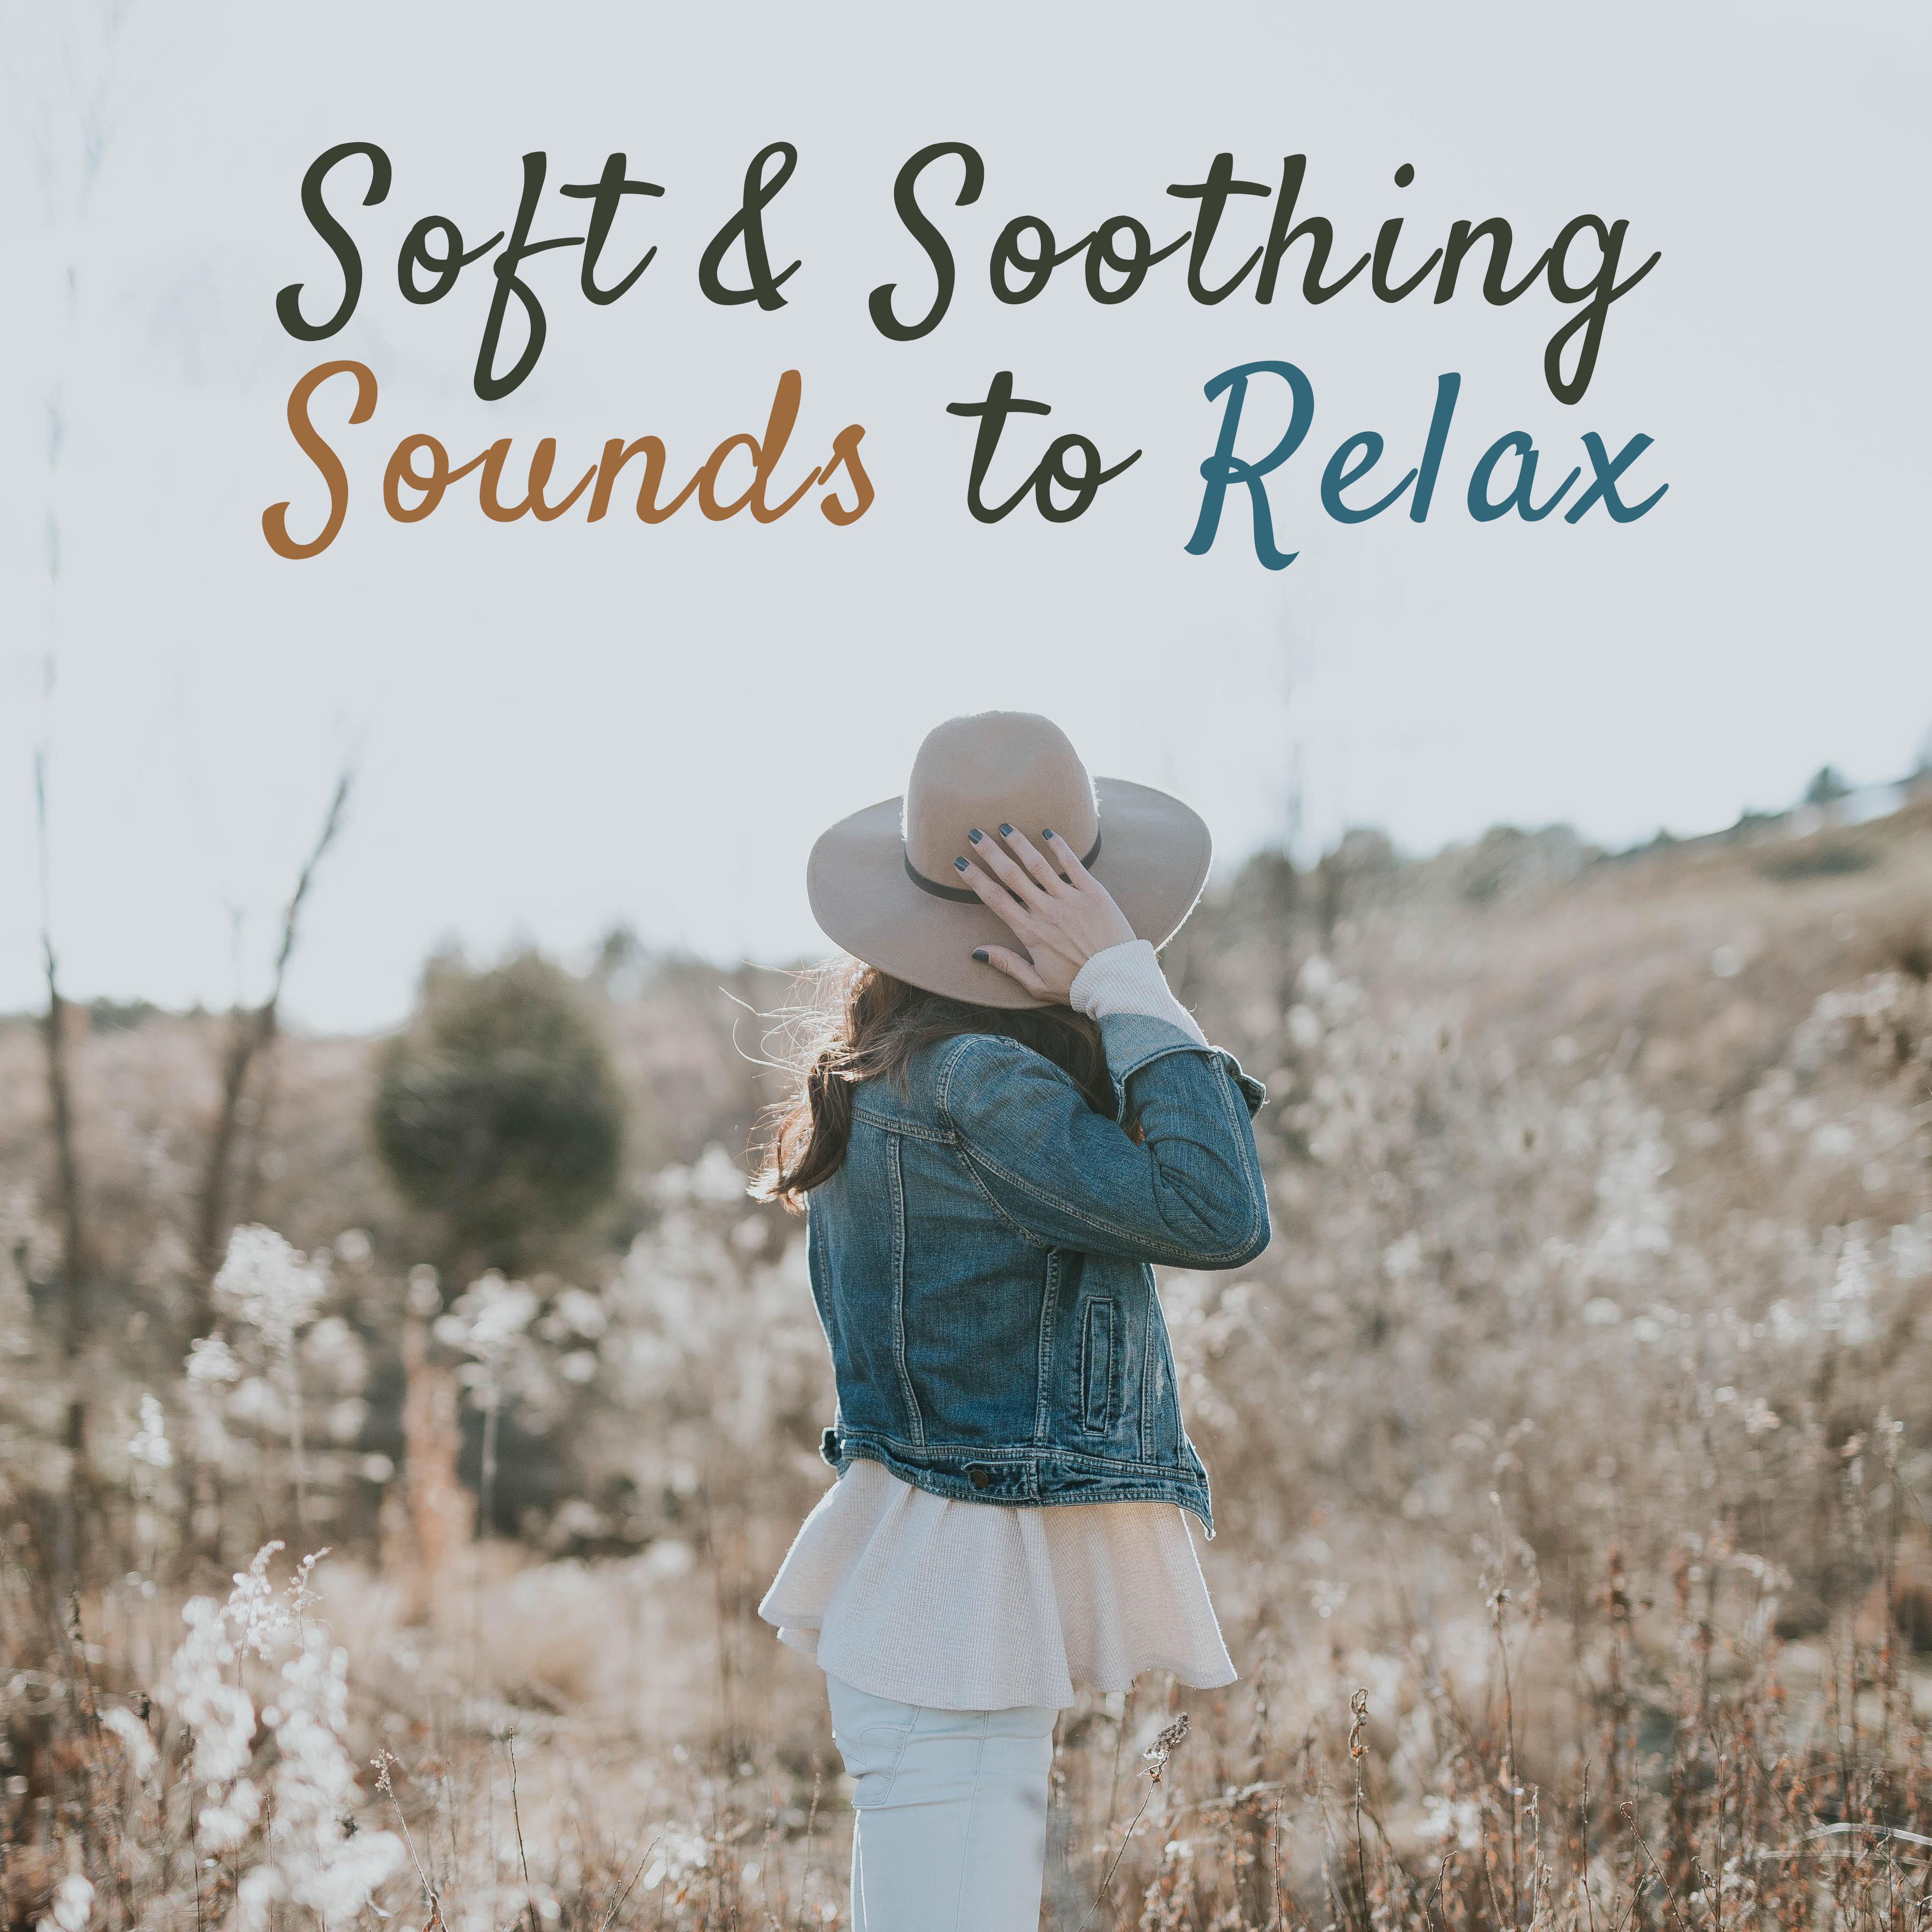 Soft & Soothing Sounds to Relax